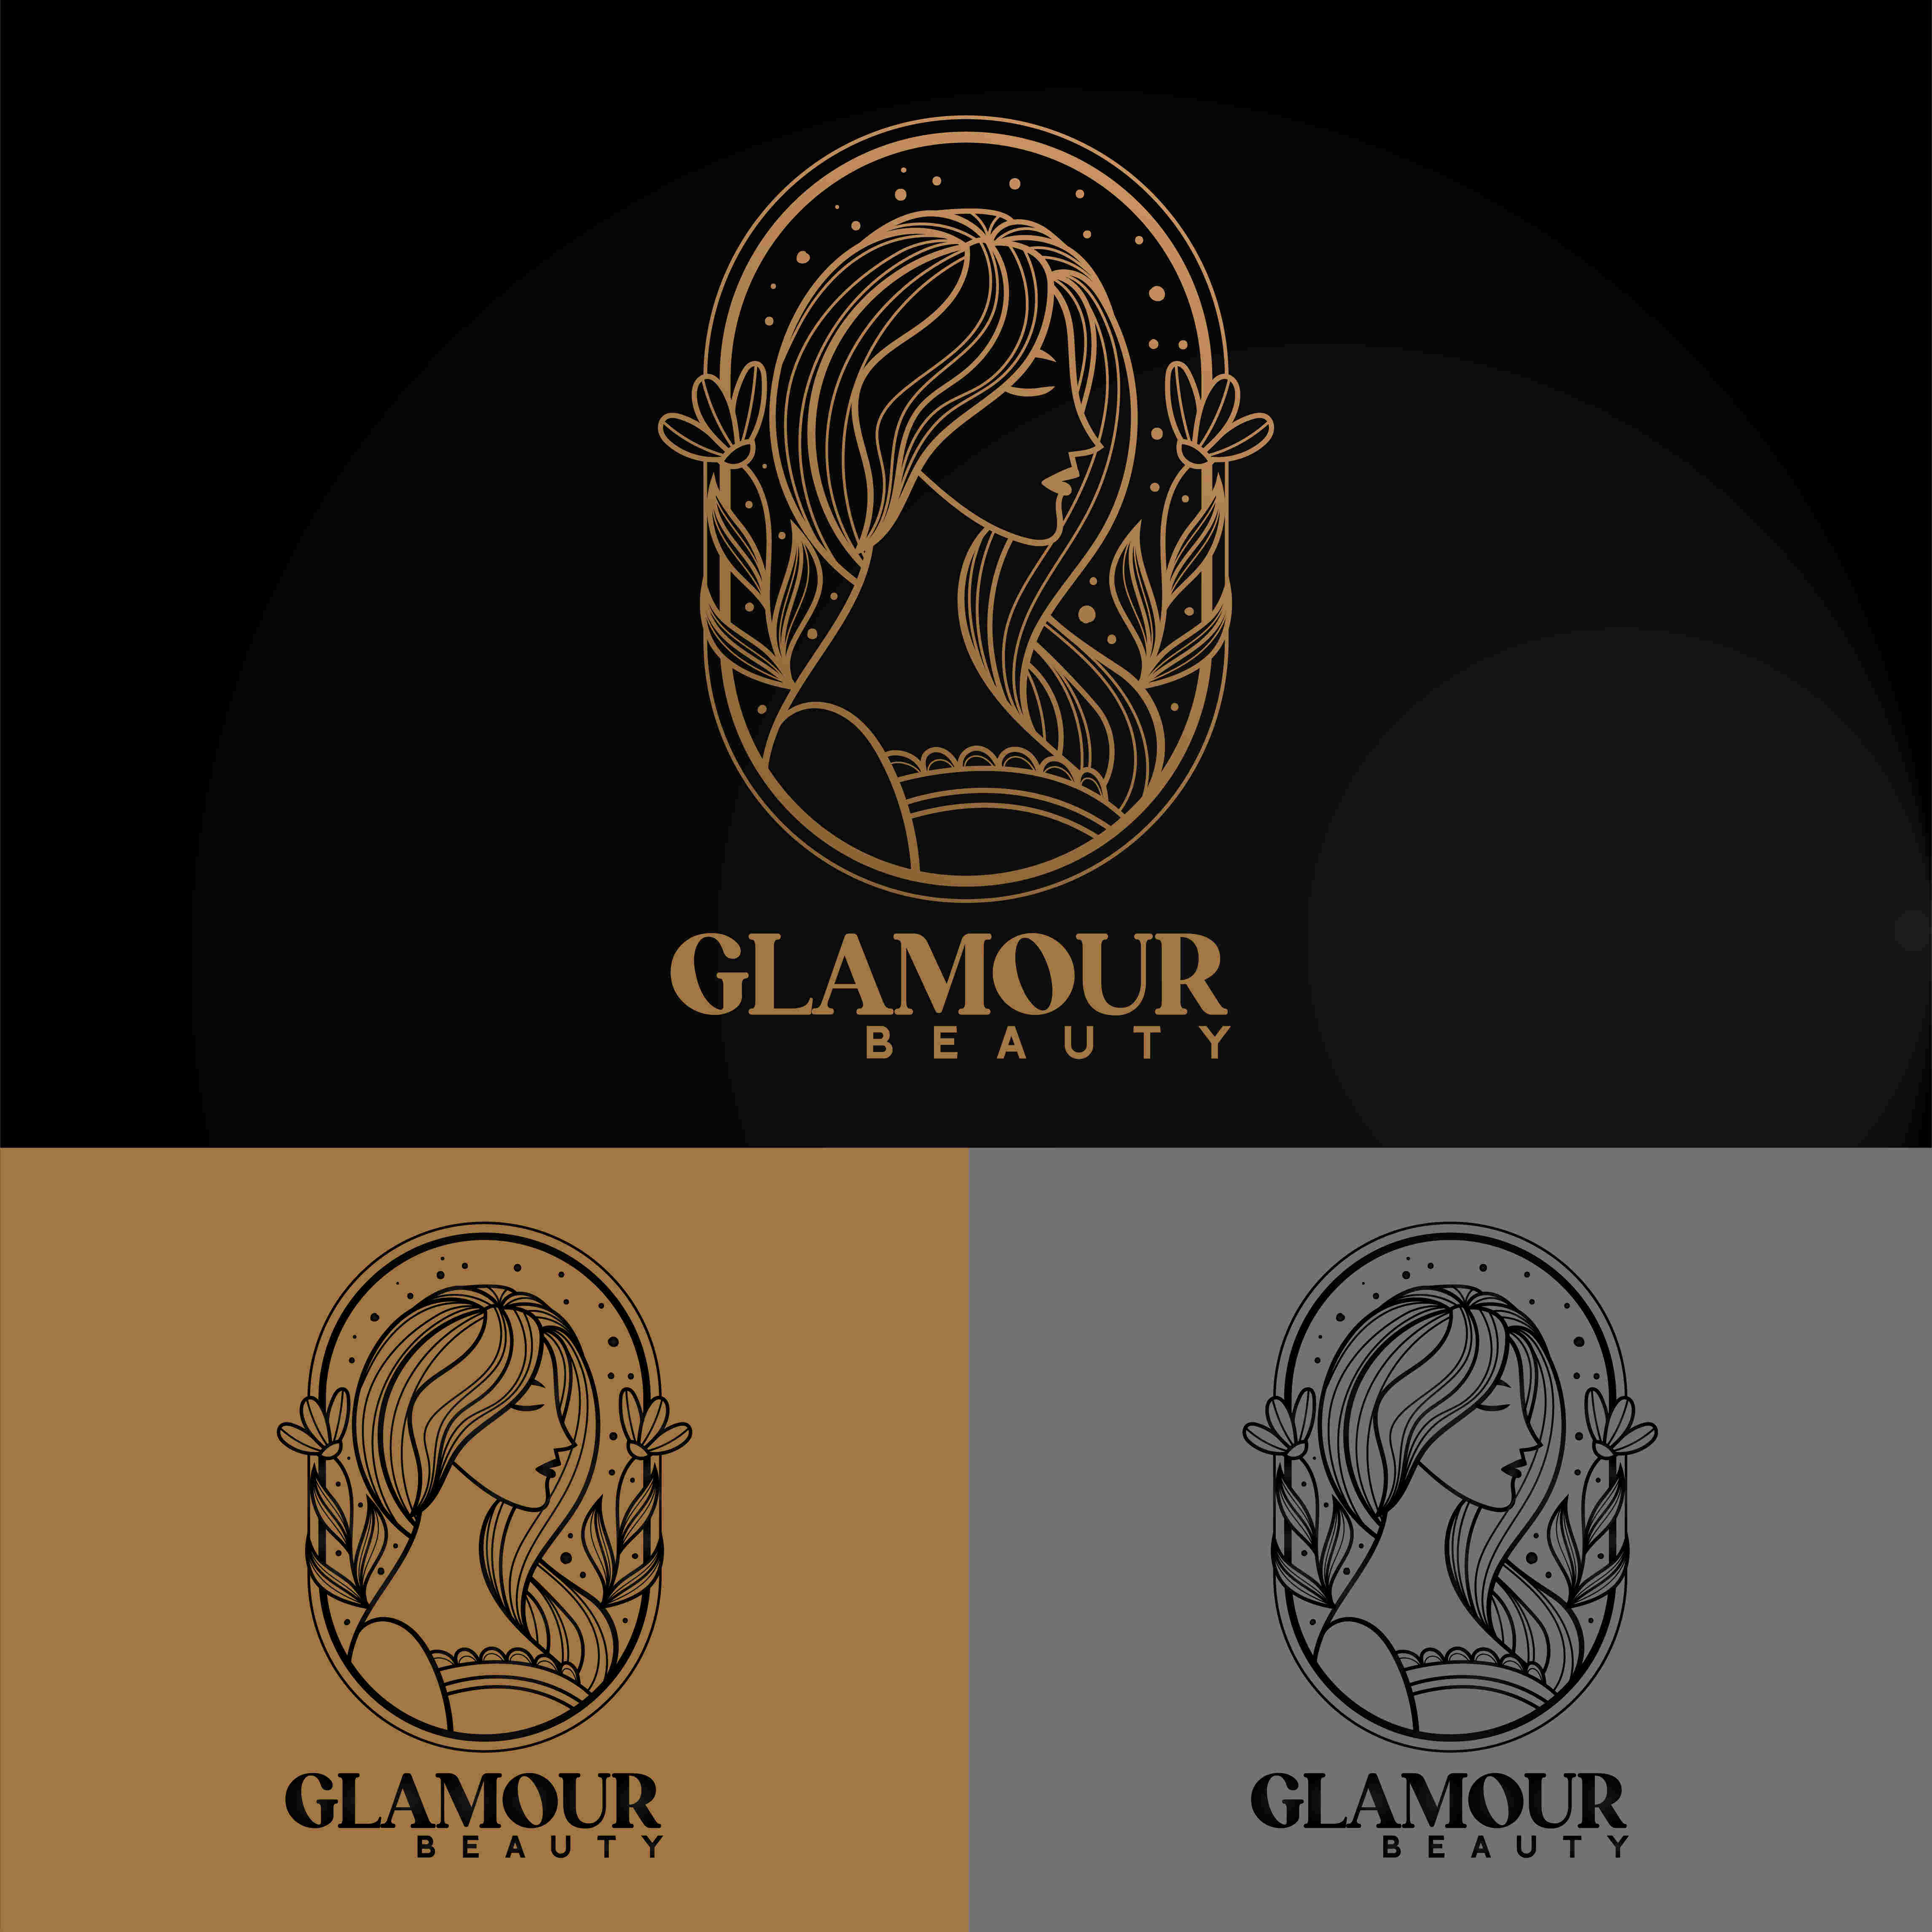 5 Glamour Beauty style Logos cover image.